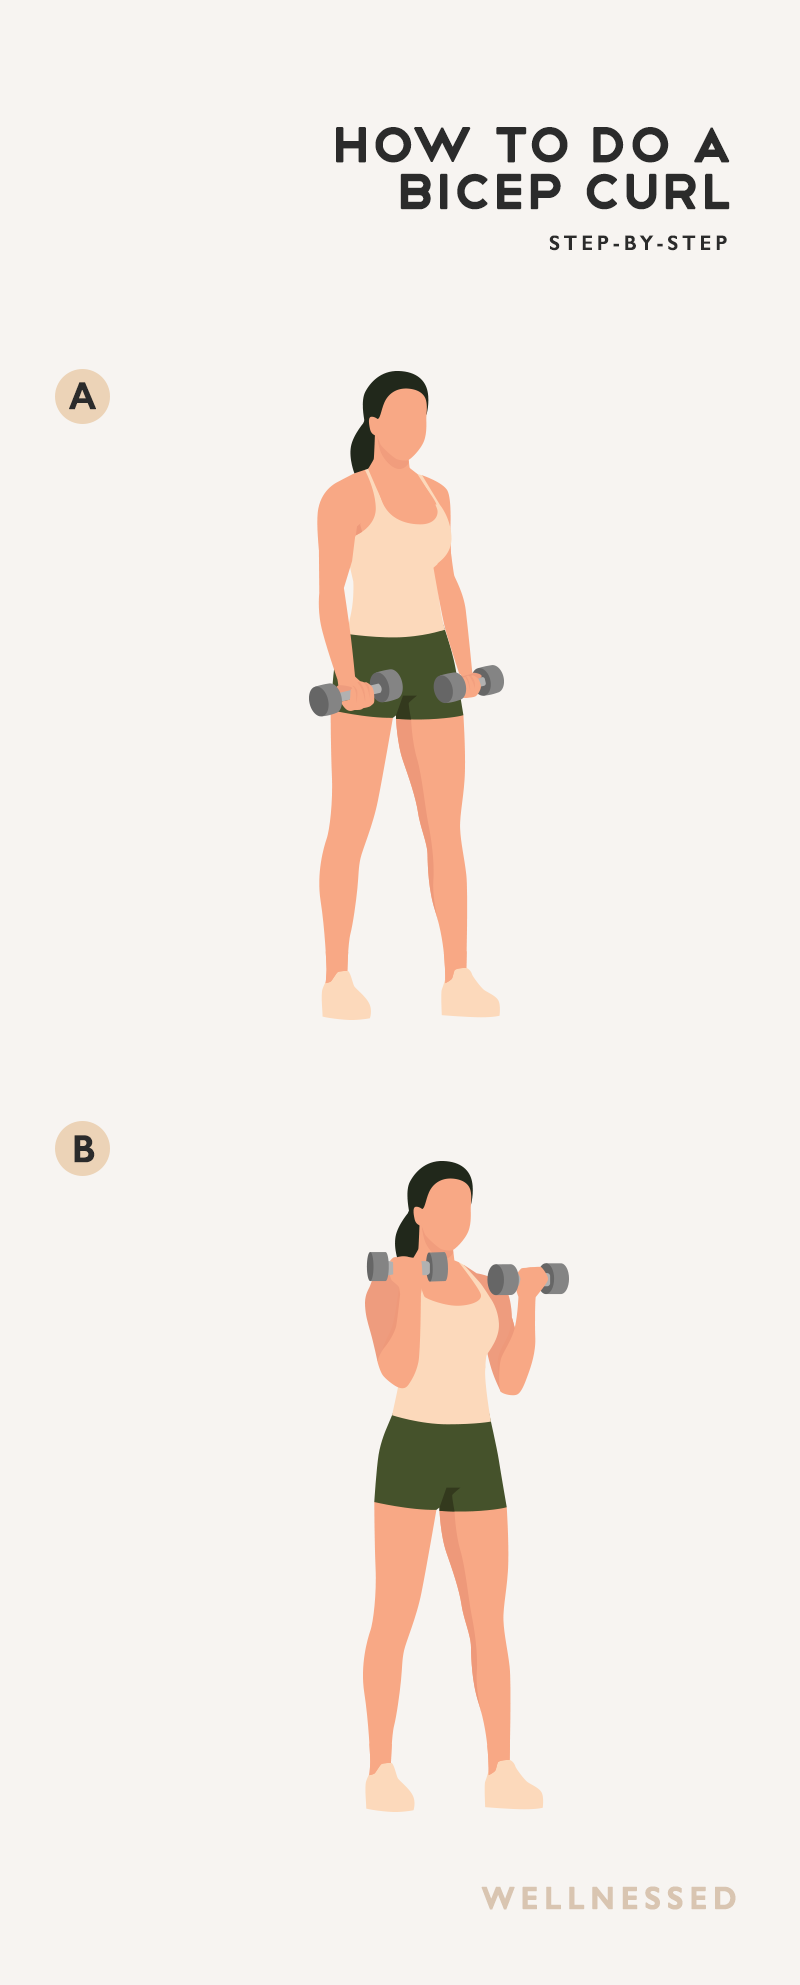 Step-by-step illustration of how to do a bicep curl.